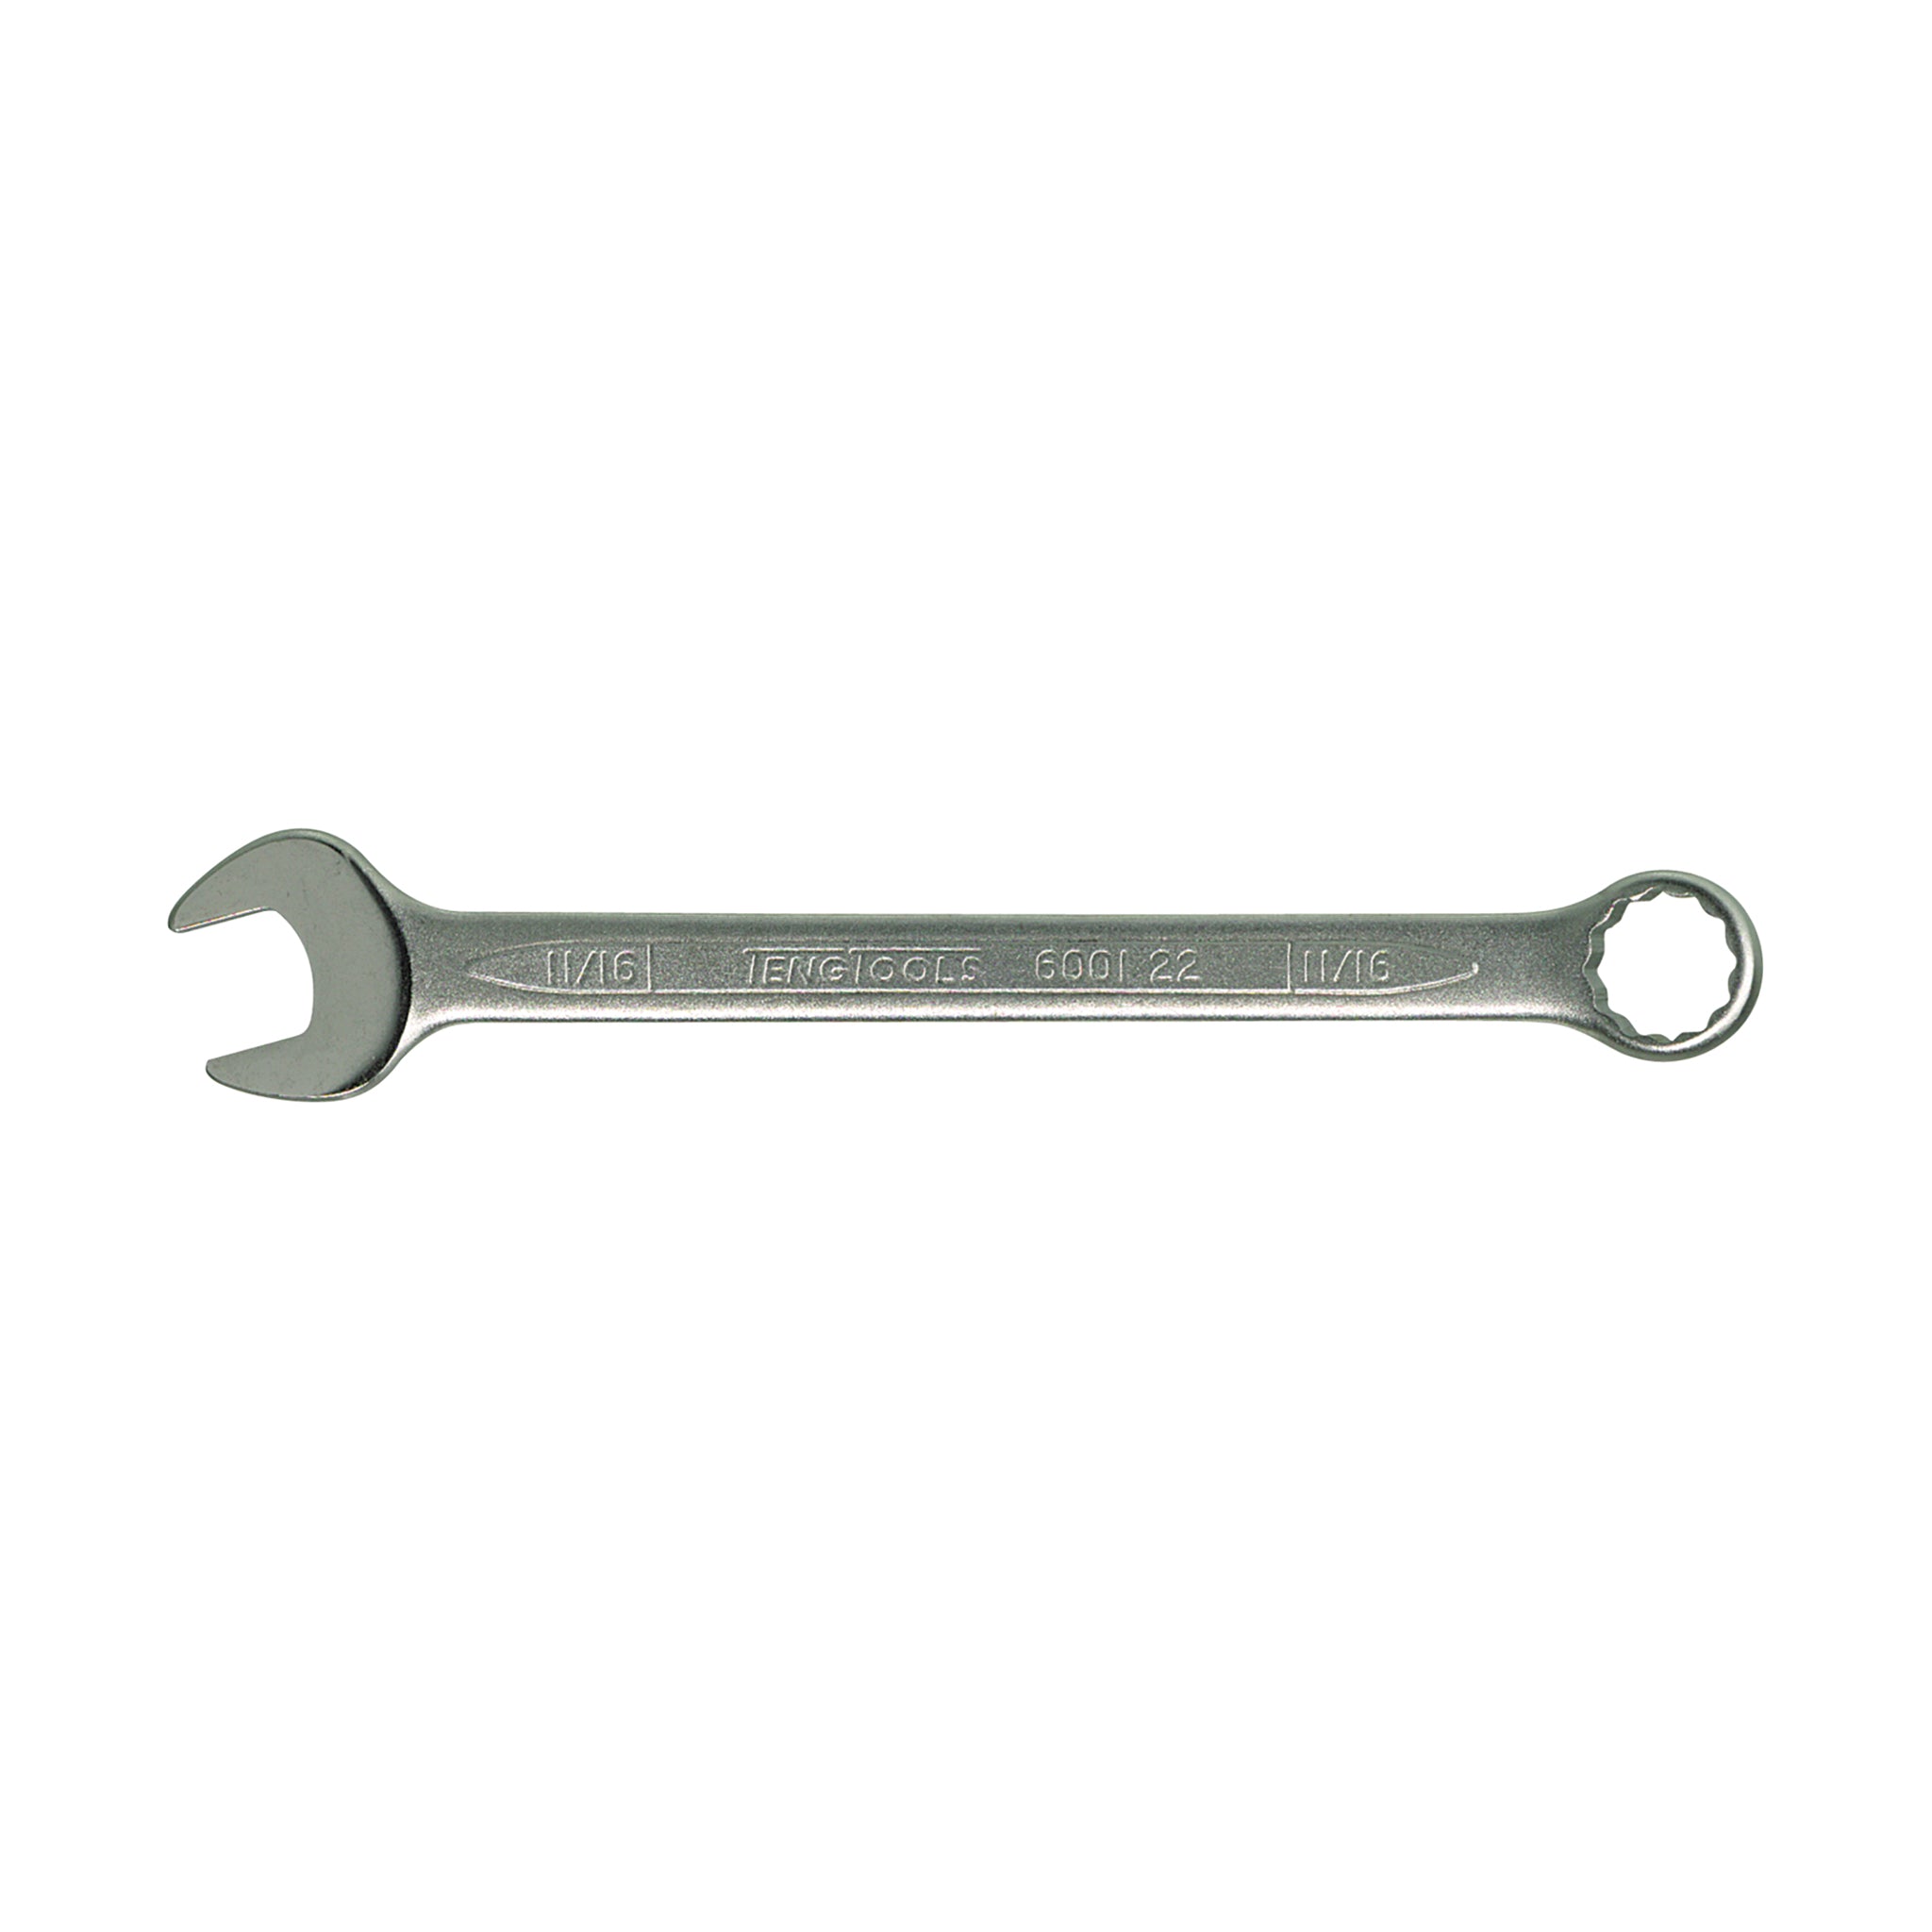 Standard Combination SAE Wrenches Made With Chrome Vanadium Steel - 1-5/8